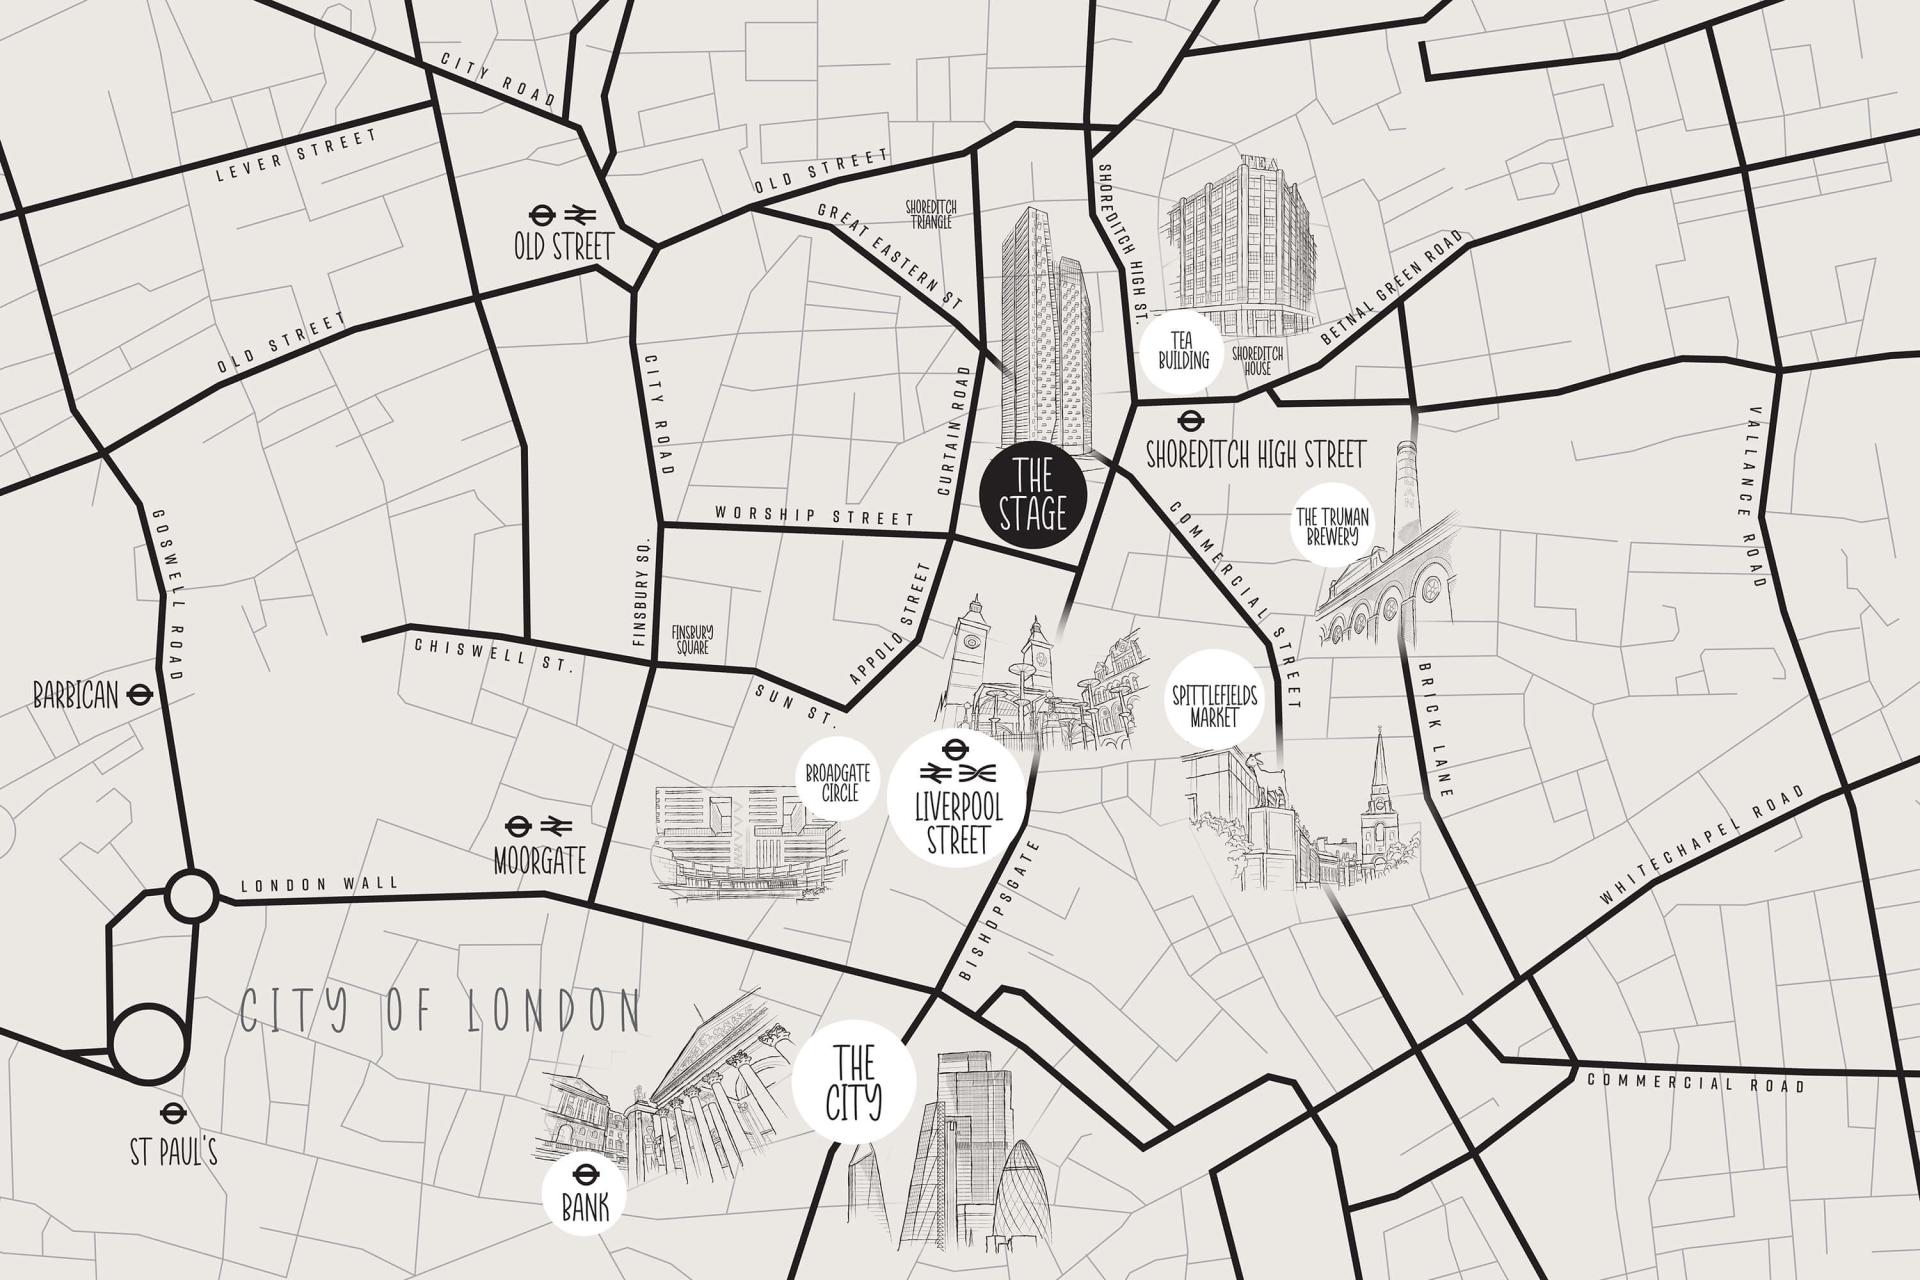 Map of Shoreditch and surrounding area